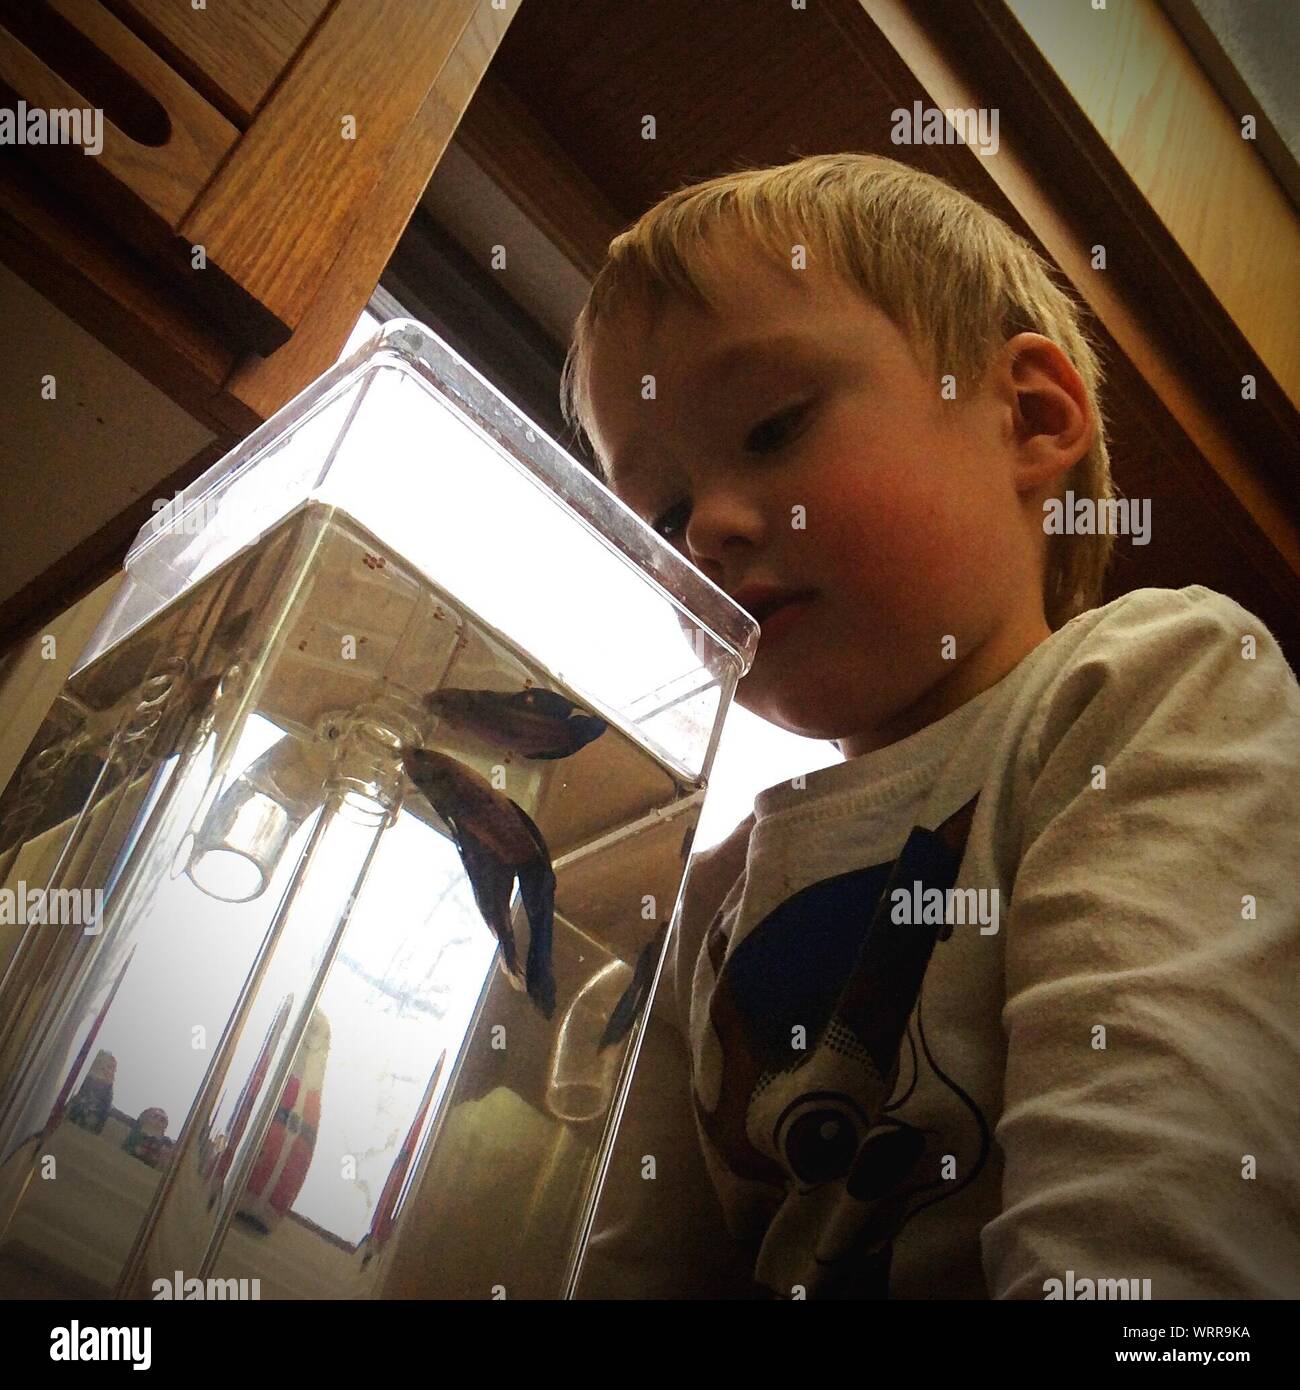 Low Angle View Of Boy Holding Fish Tank Stock Photo